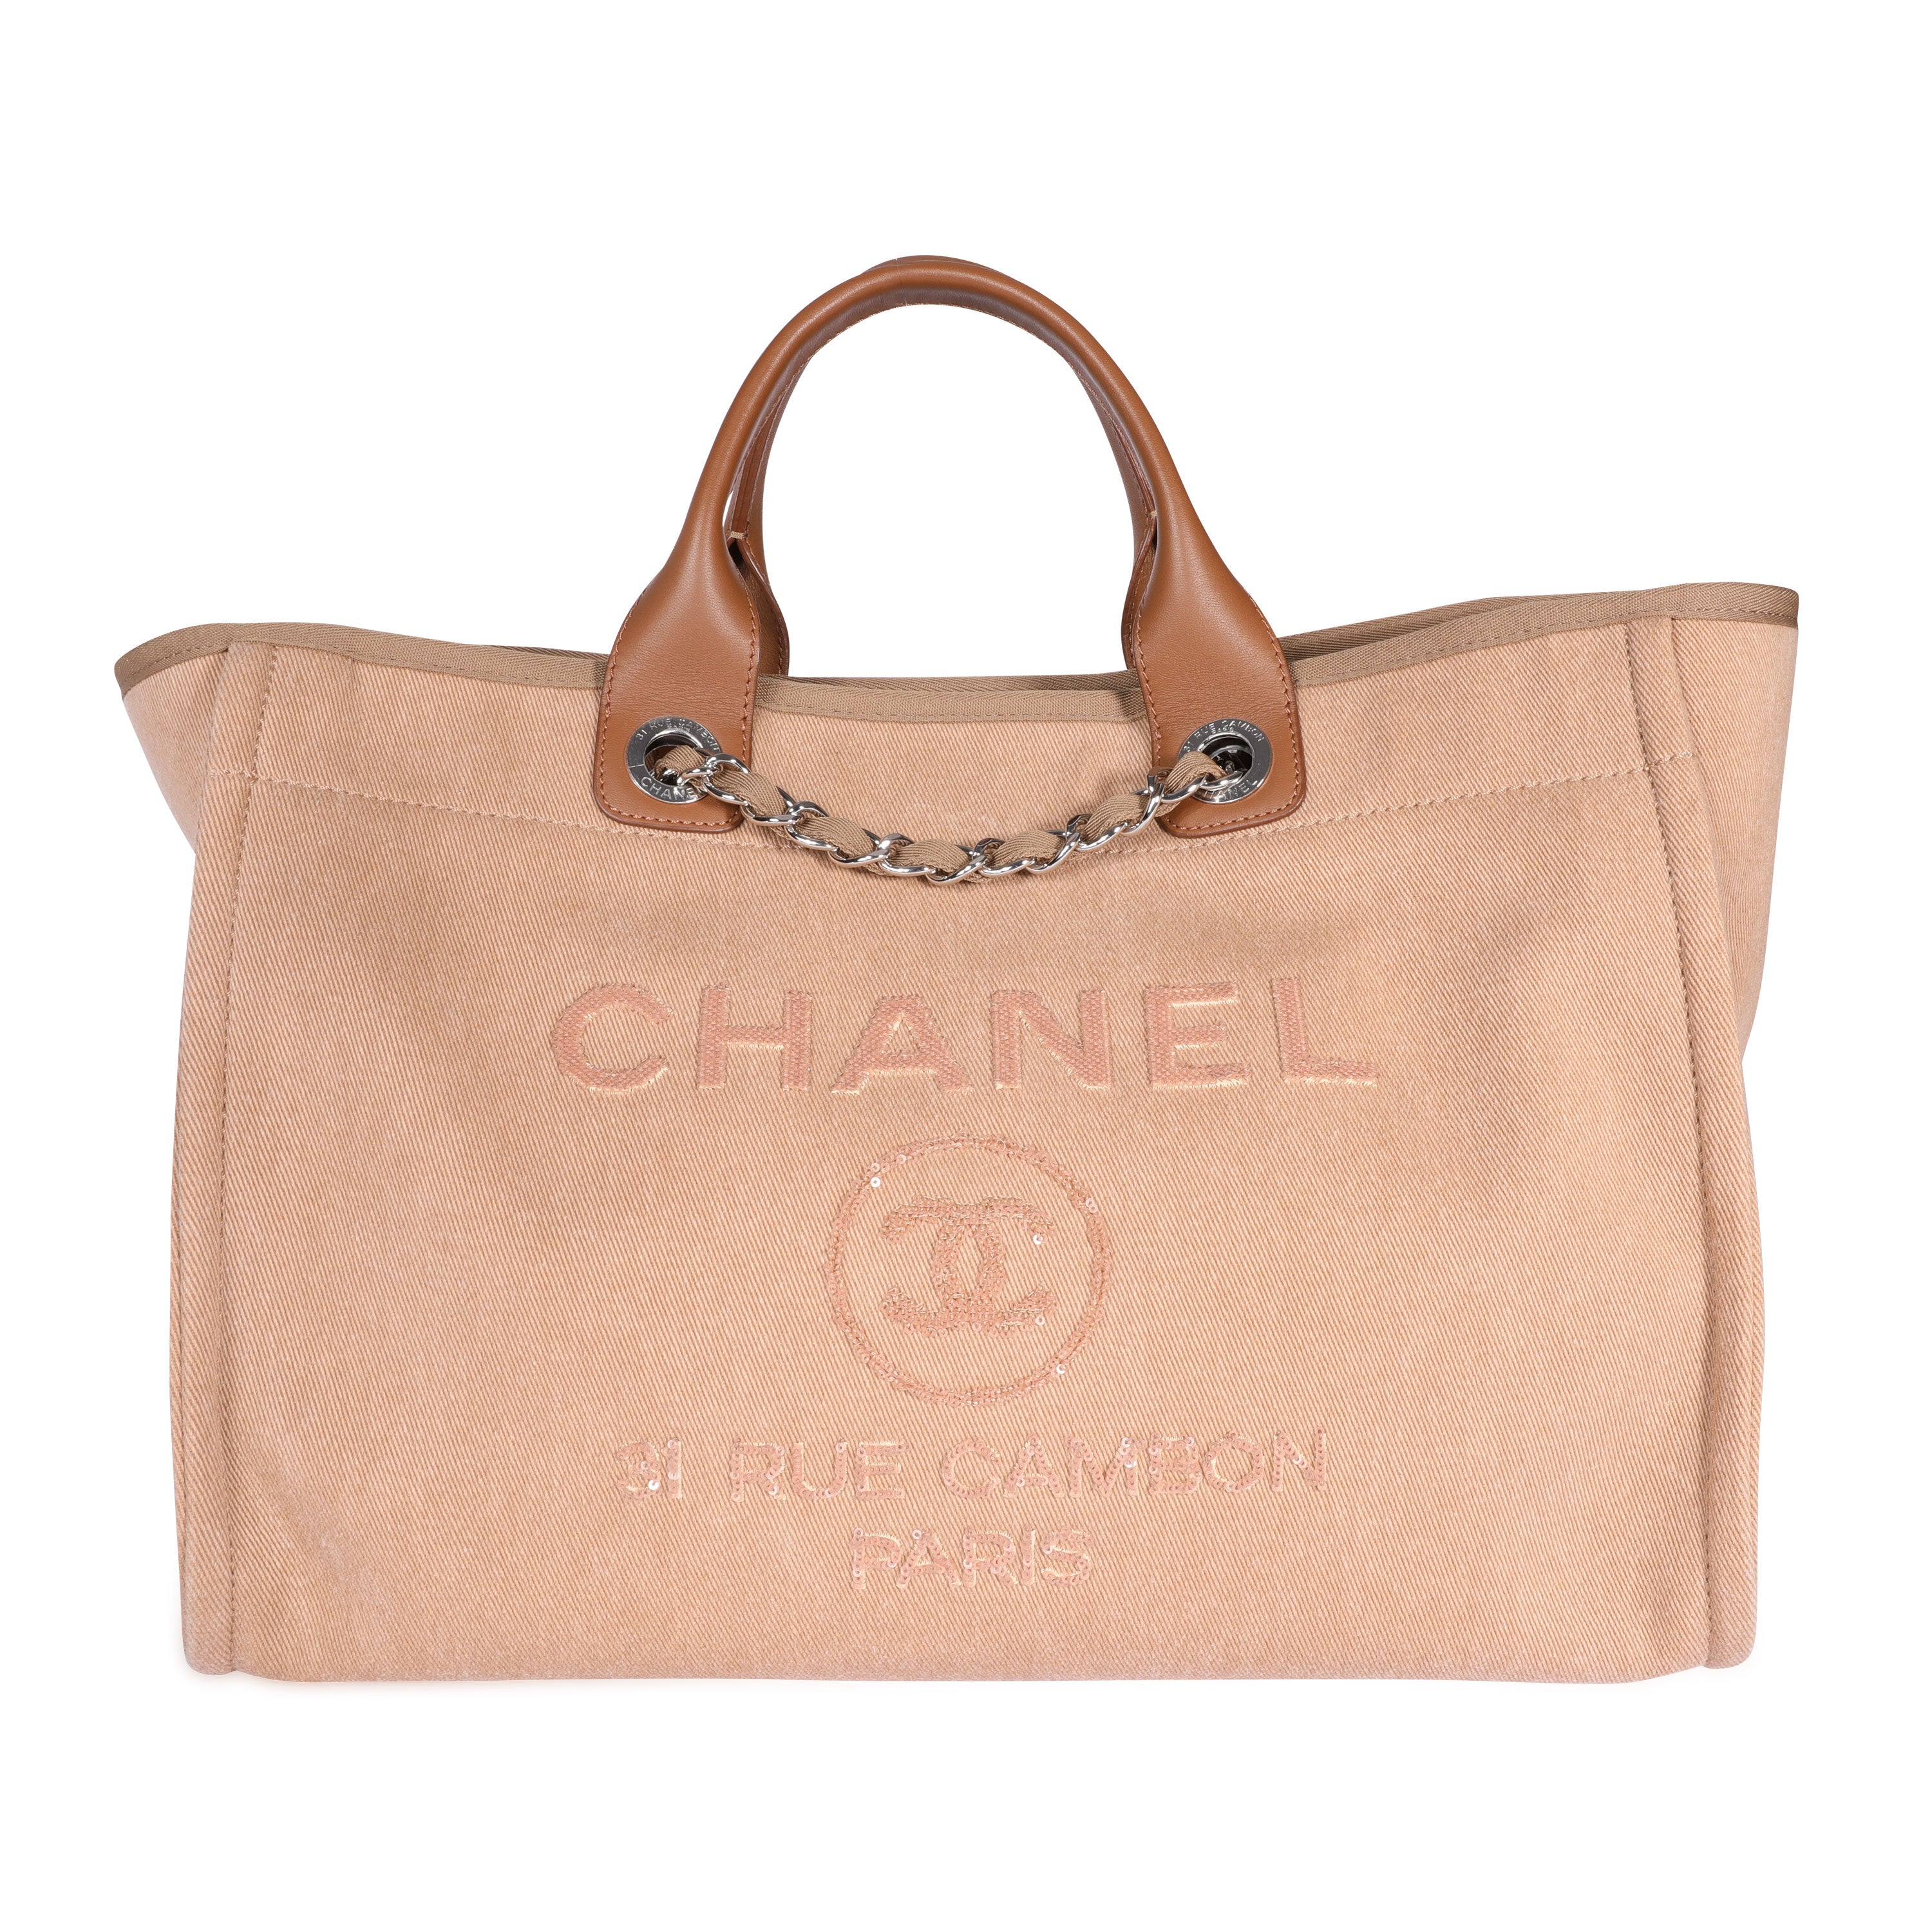 Sold at Auction: Chanel Large Tote